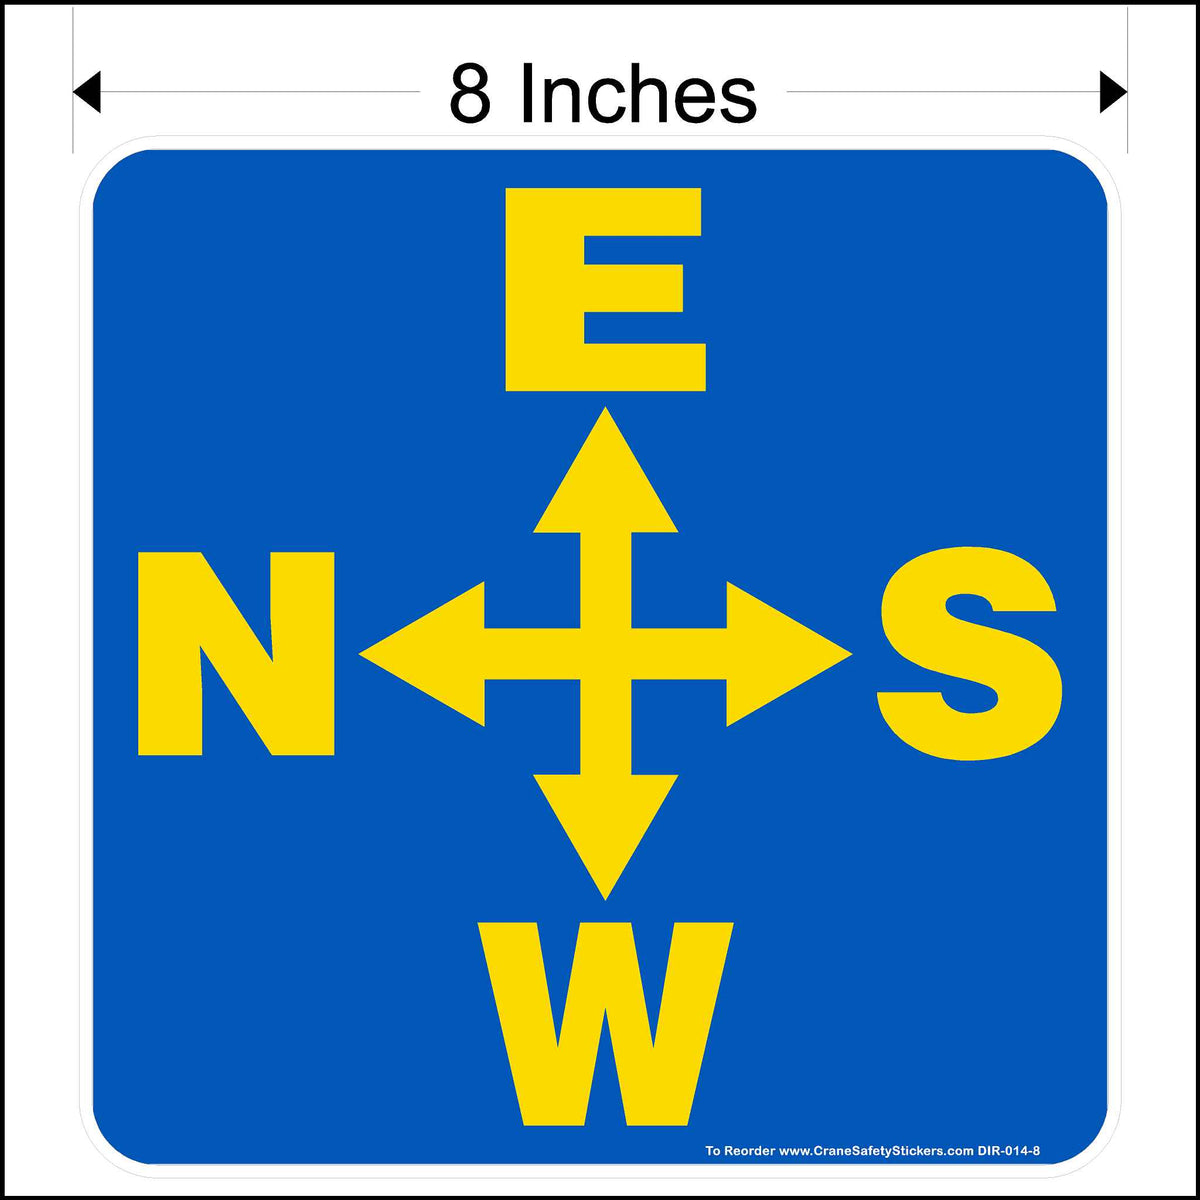 8 Inch overhead crane directional decal. Printed with yellow East, South, West, and North Arrows on a blue background.